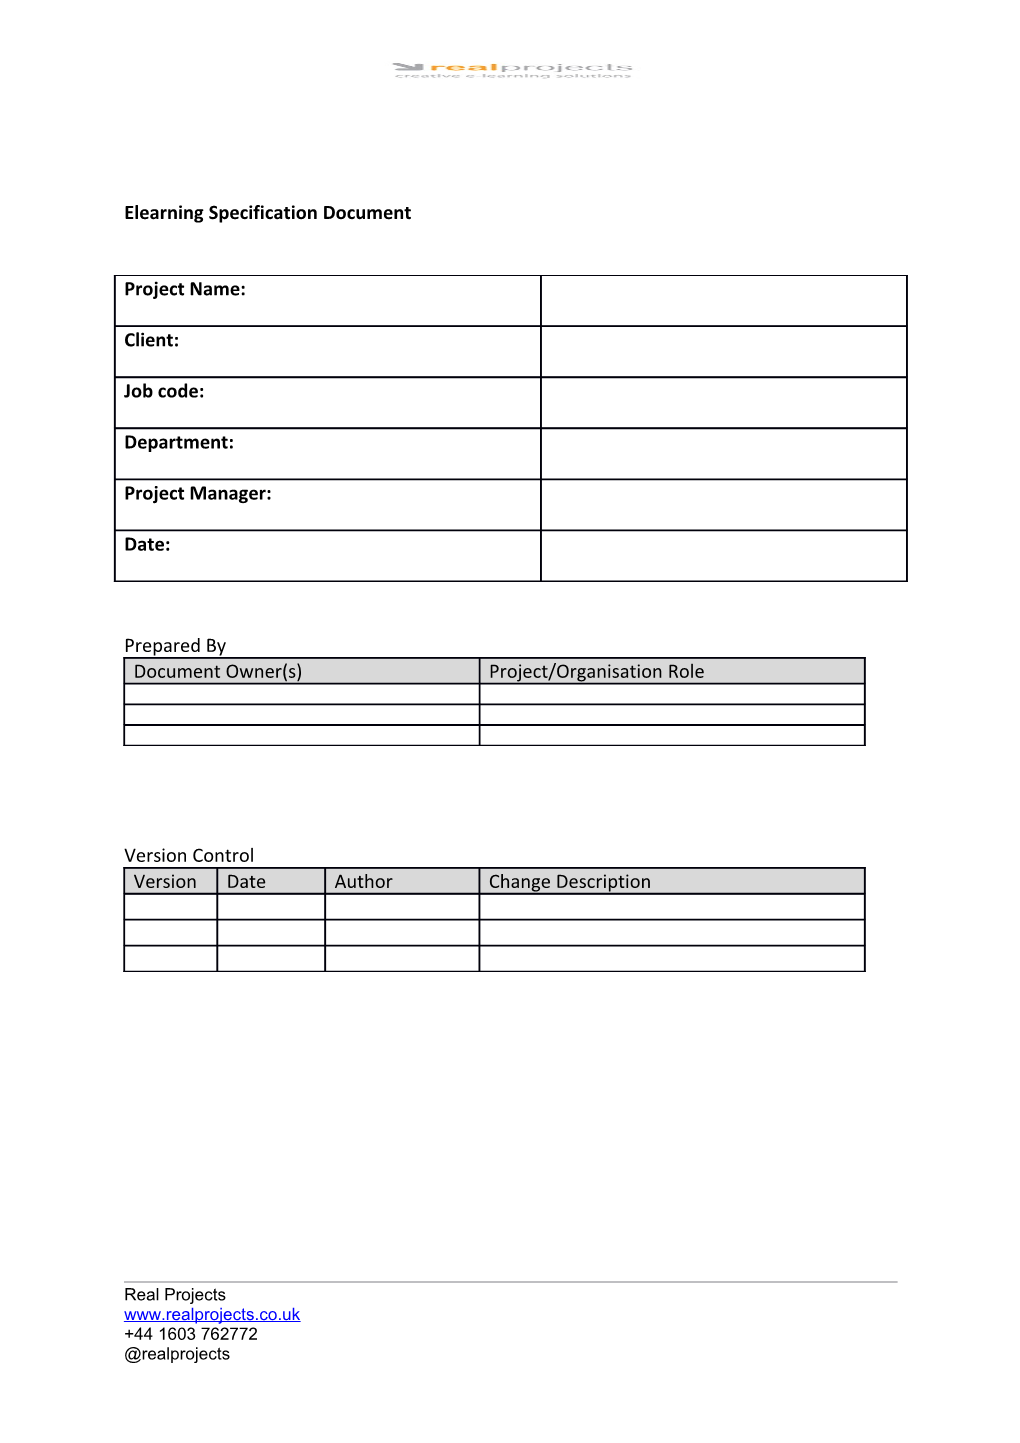 Elearning Specification Document